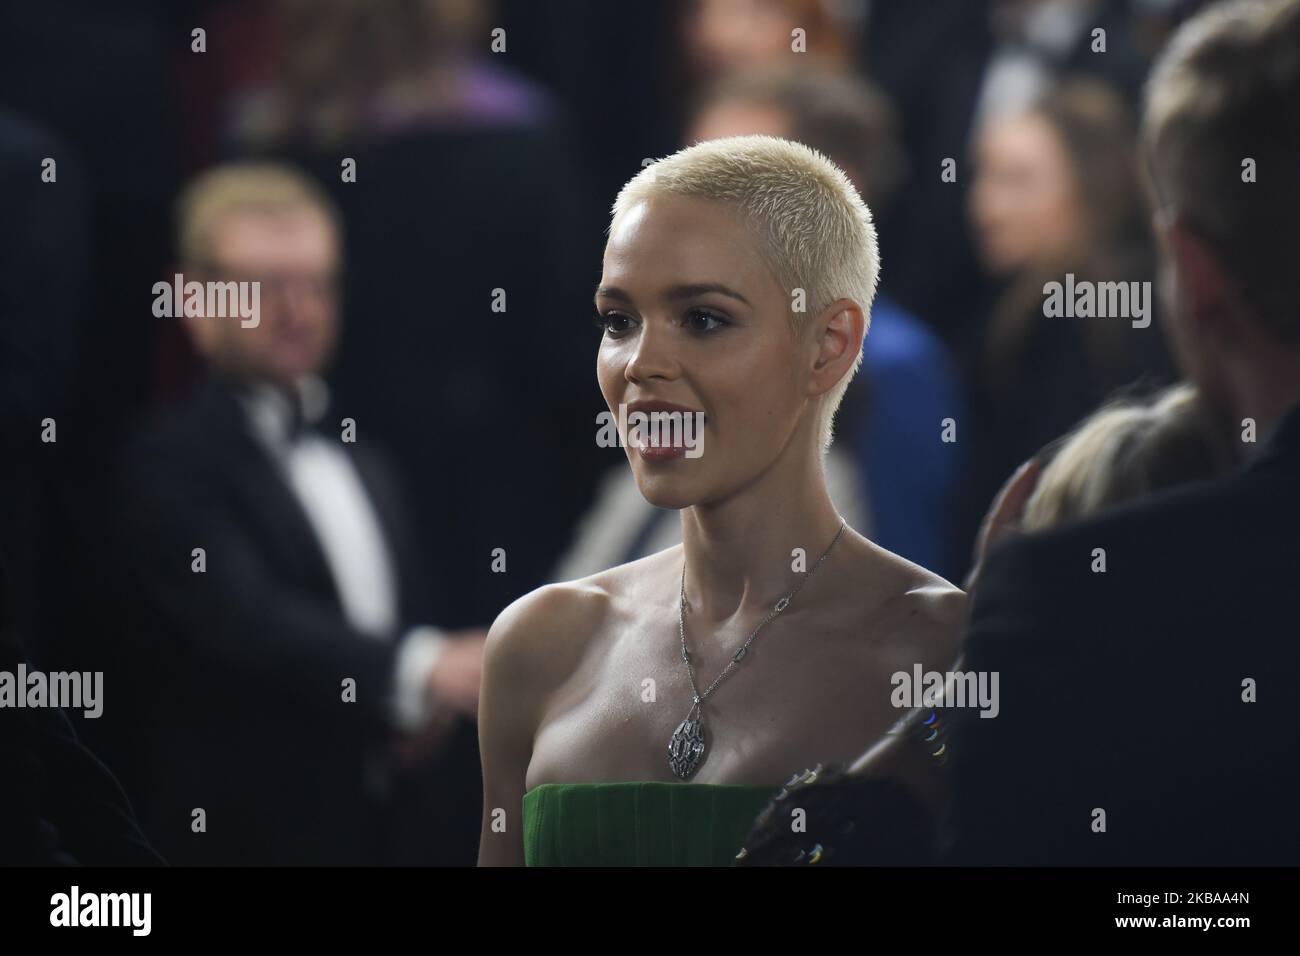 Emilia Schule, a German actress, arrives for the 21st GQ Men of the Year Award at Komische Oper in Berlin. On Thursday, November 7, 2019, in Berlin, Germany. (Photo by Artur Widak/NurPhoto) Stock Photo